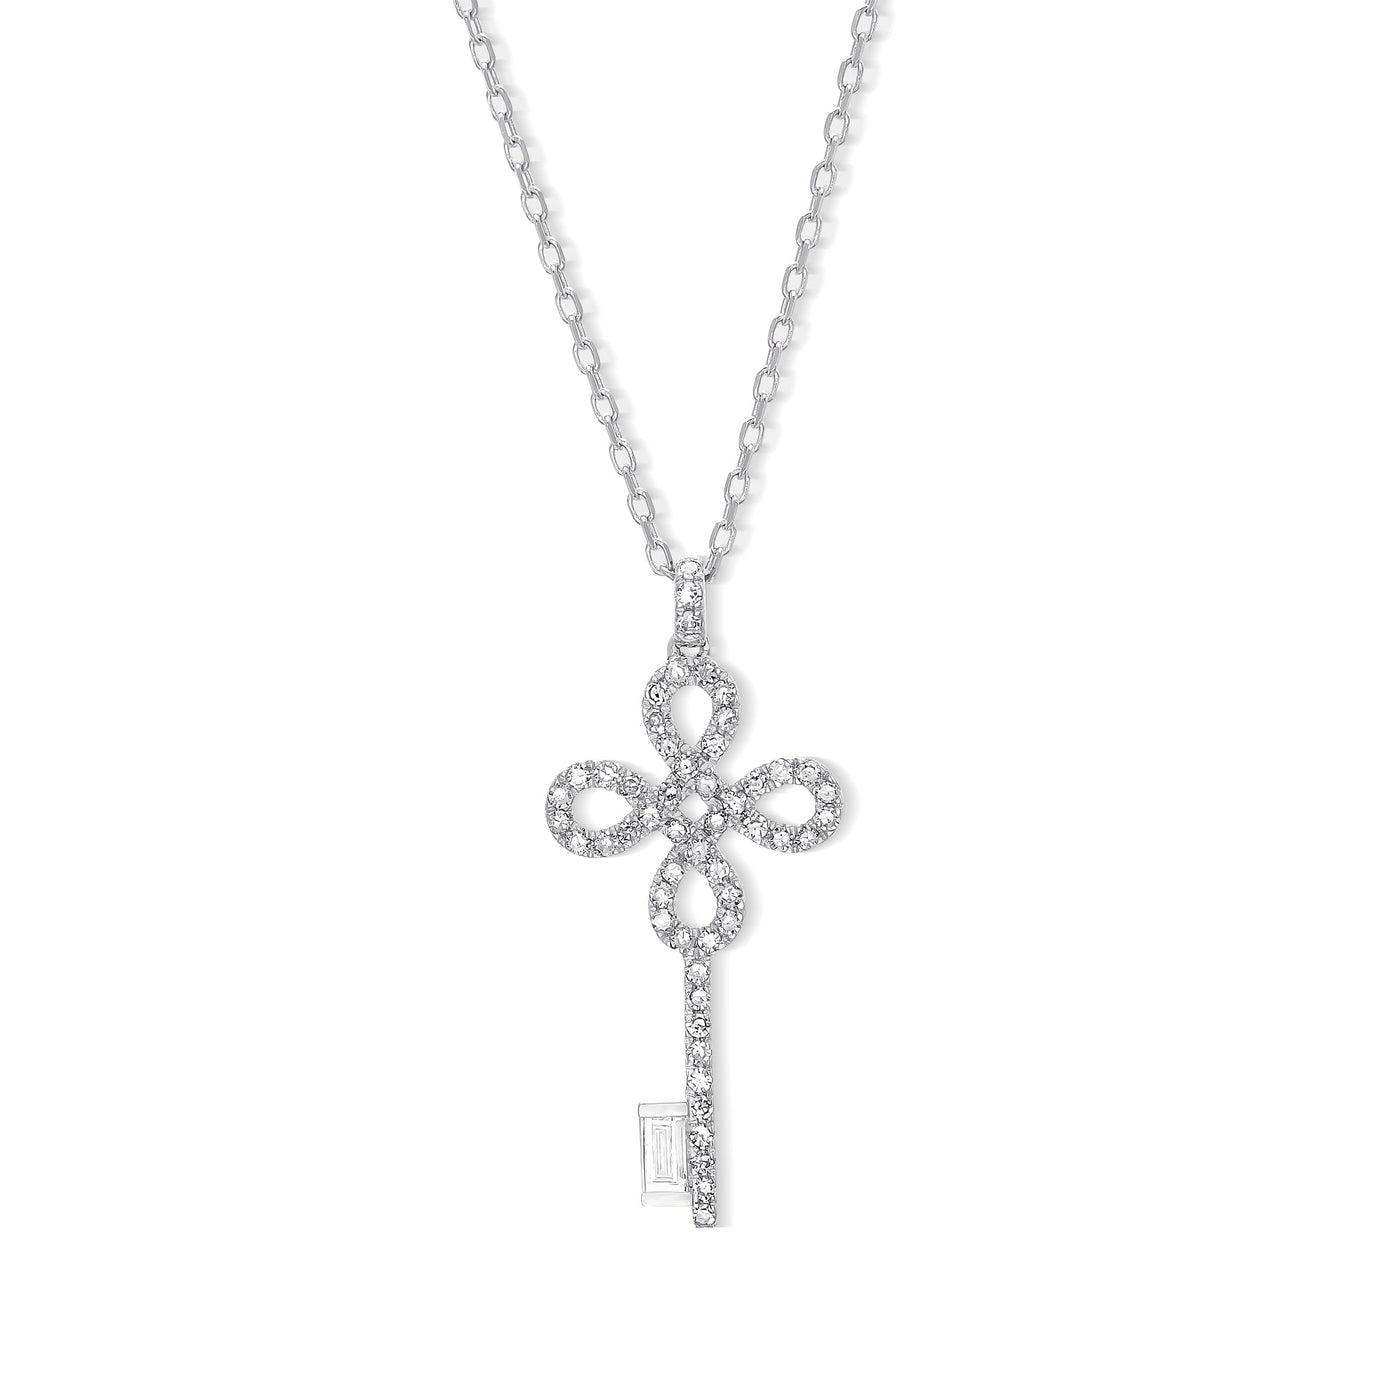 Key to Your Heart Diamond Necklace